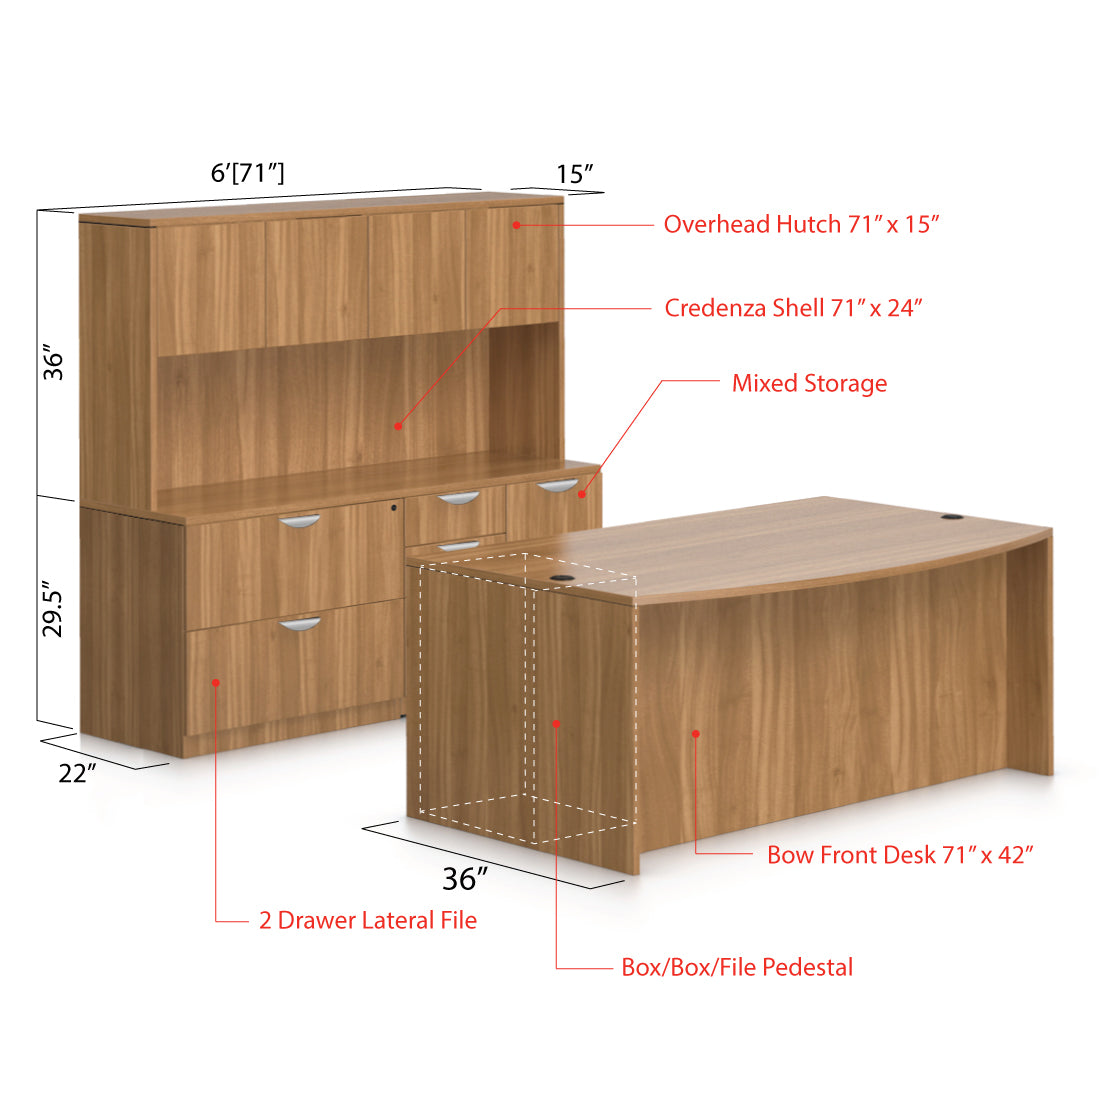 71"x42" Bow Front Desk, Lateral File & Mixed Storage, Hutch Added - Kainosbuy.com